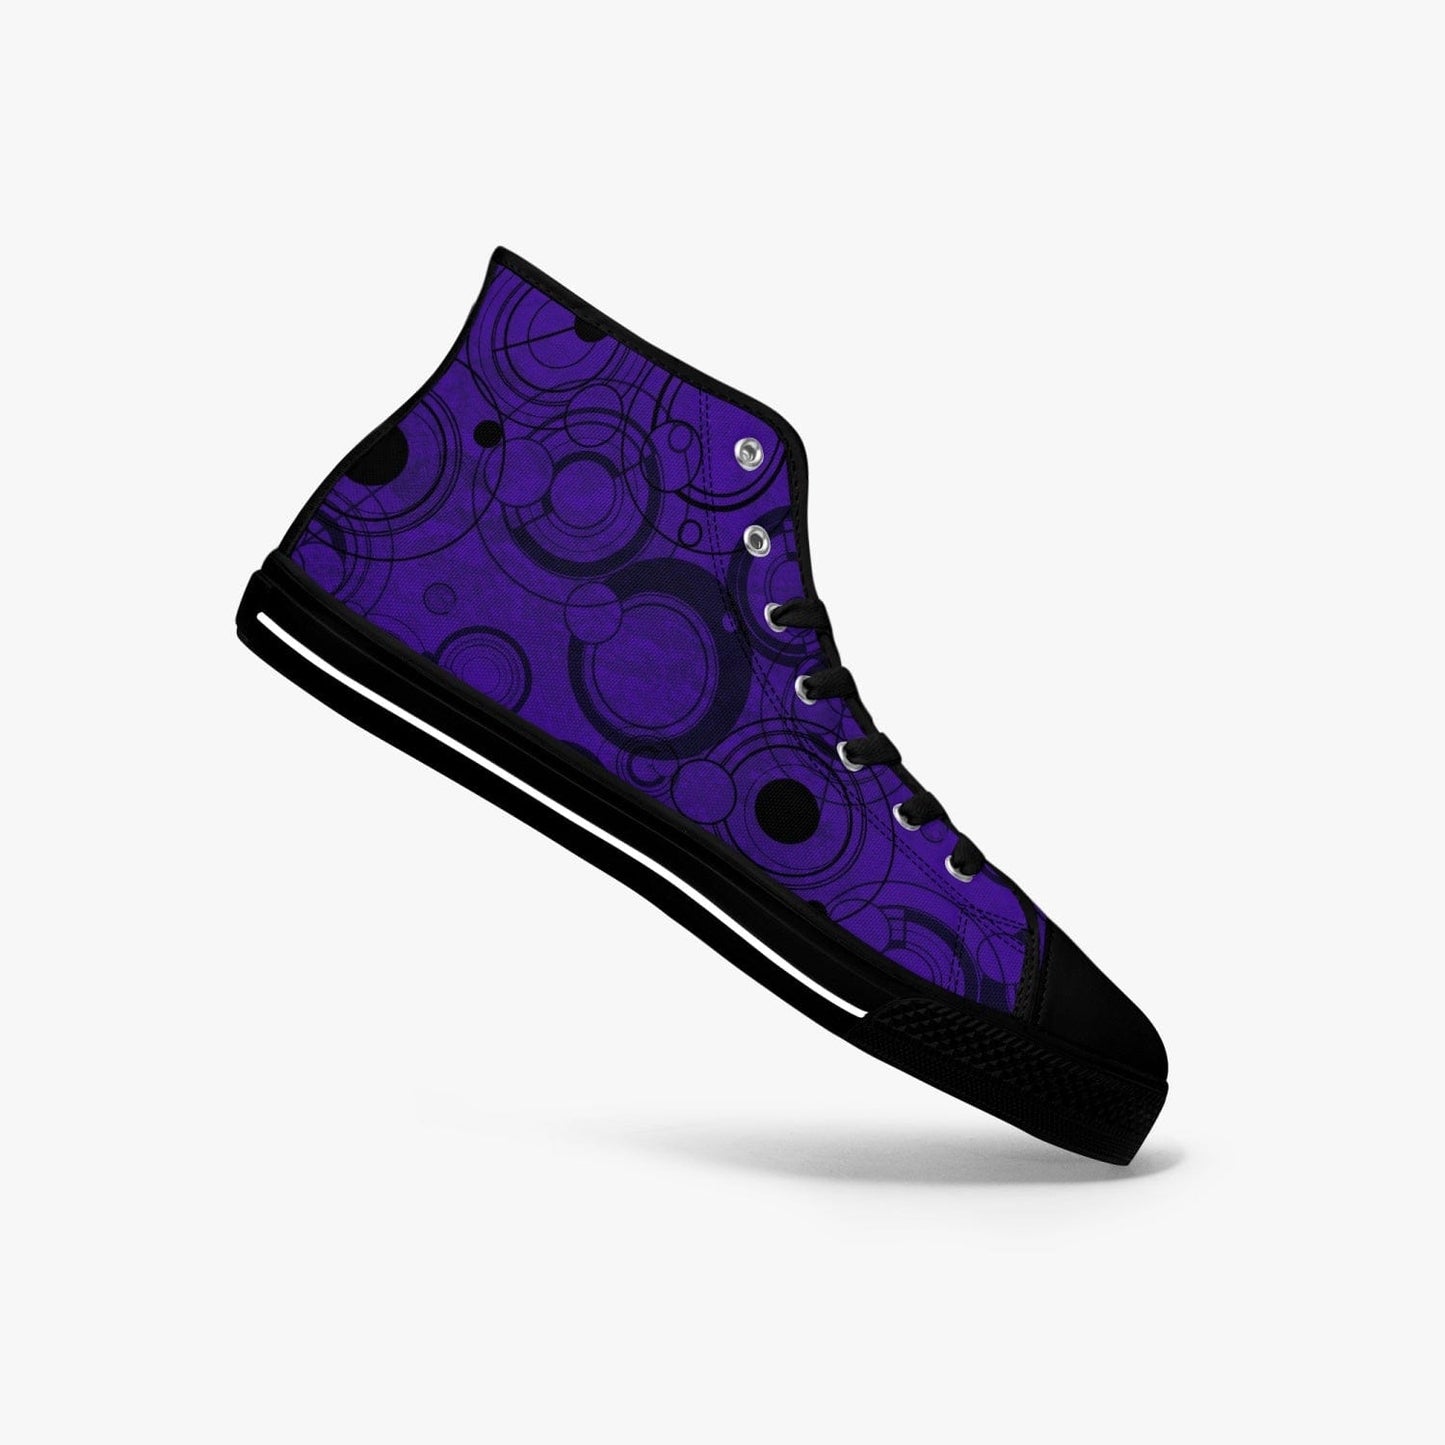 profile view of the Dr Who Gallifreyan Gallifrey language high top men's sneakers in purple and black at Gallery Serpentine